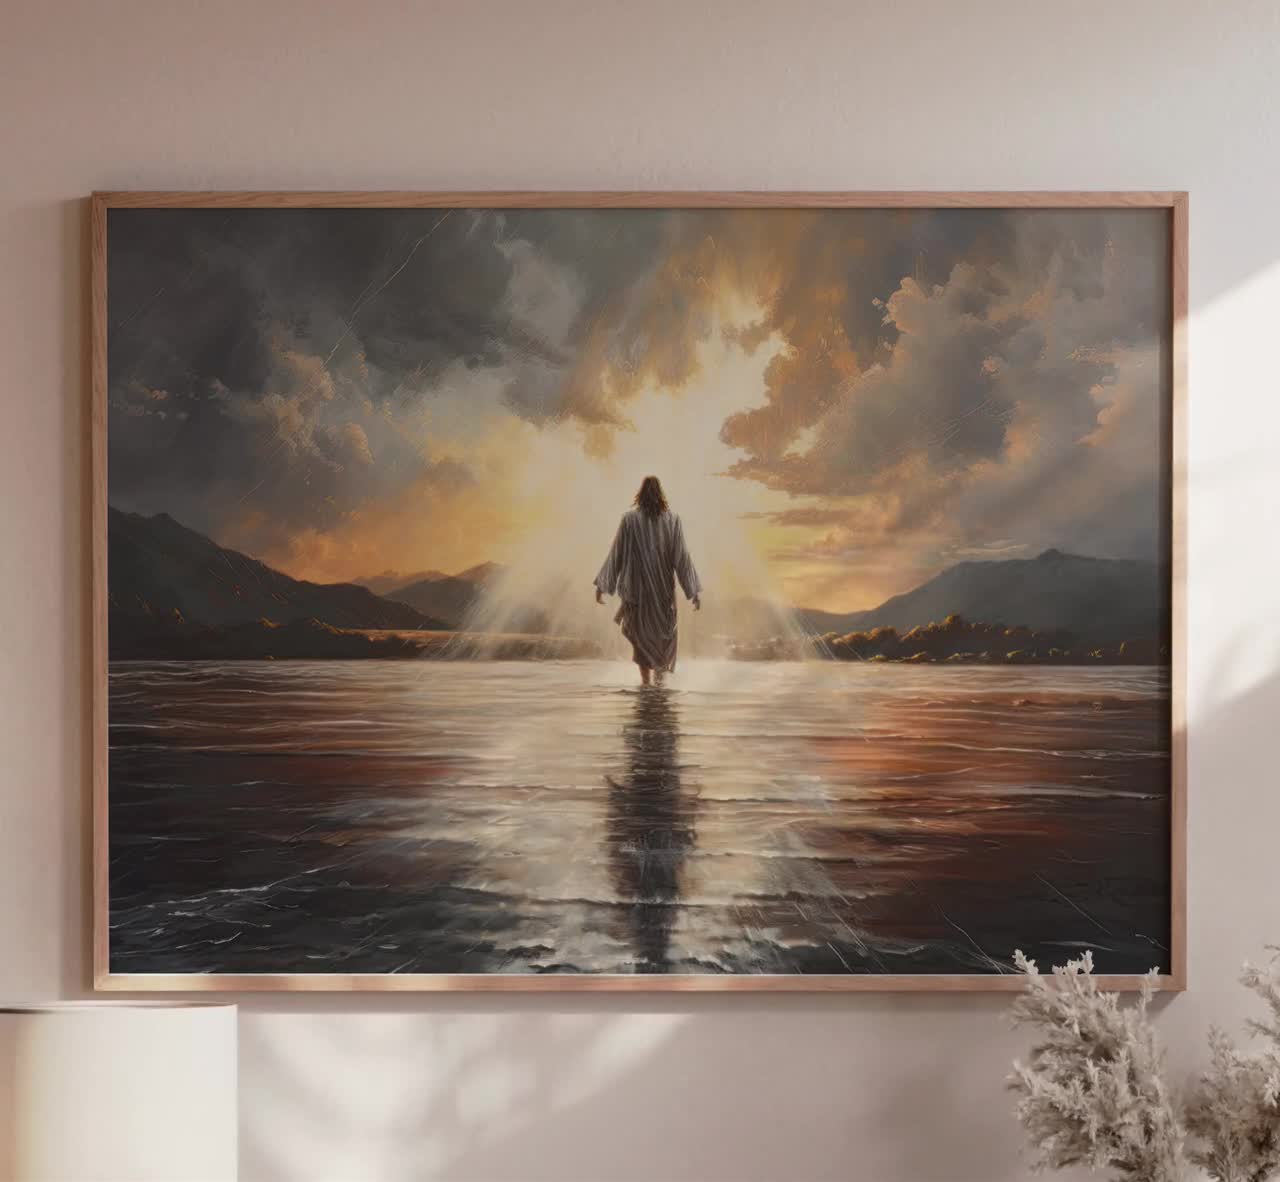 Painting, Art Oil Jesus Christian Walking Print, Religious Clouds Wall Art, Original Religious Matte Print Christ Etsy - Water Wall Holy Decor, on